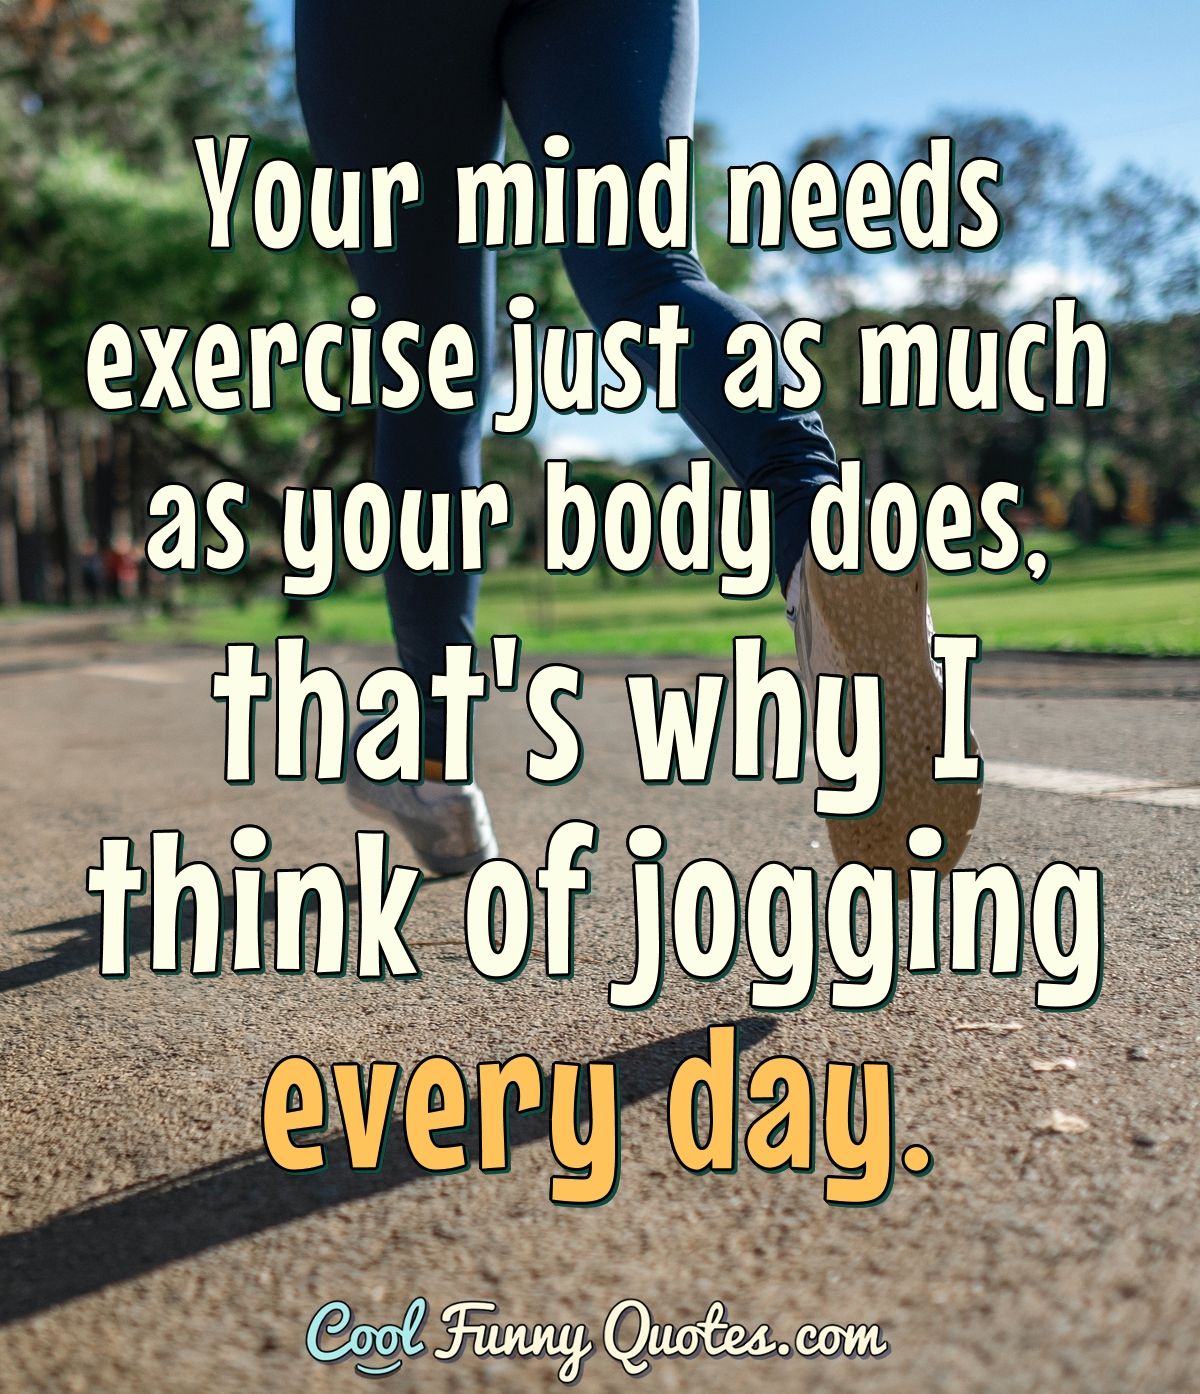 Your mind needs exercise just as much as your body does, that's why I think of jogging every day. - Anonymous